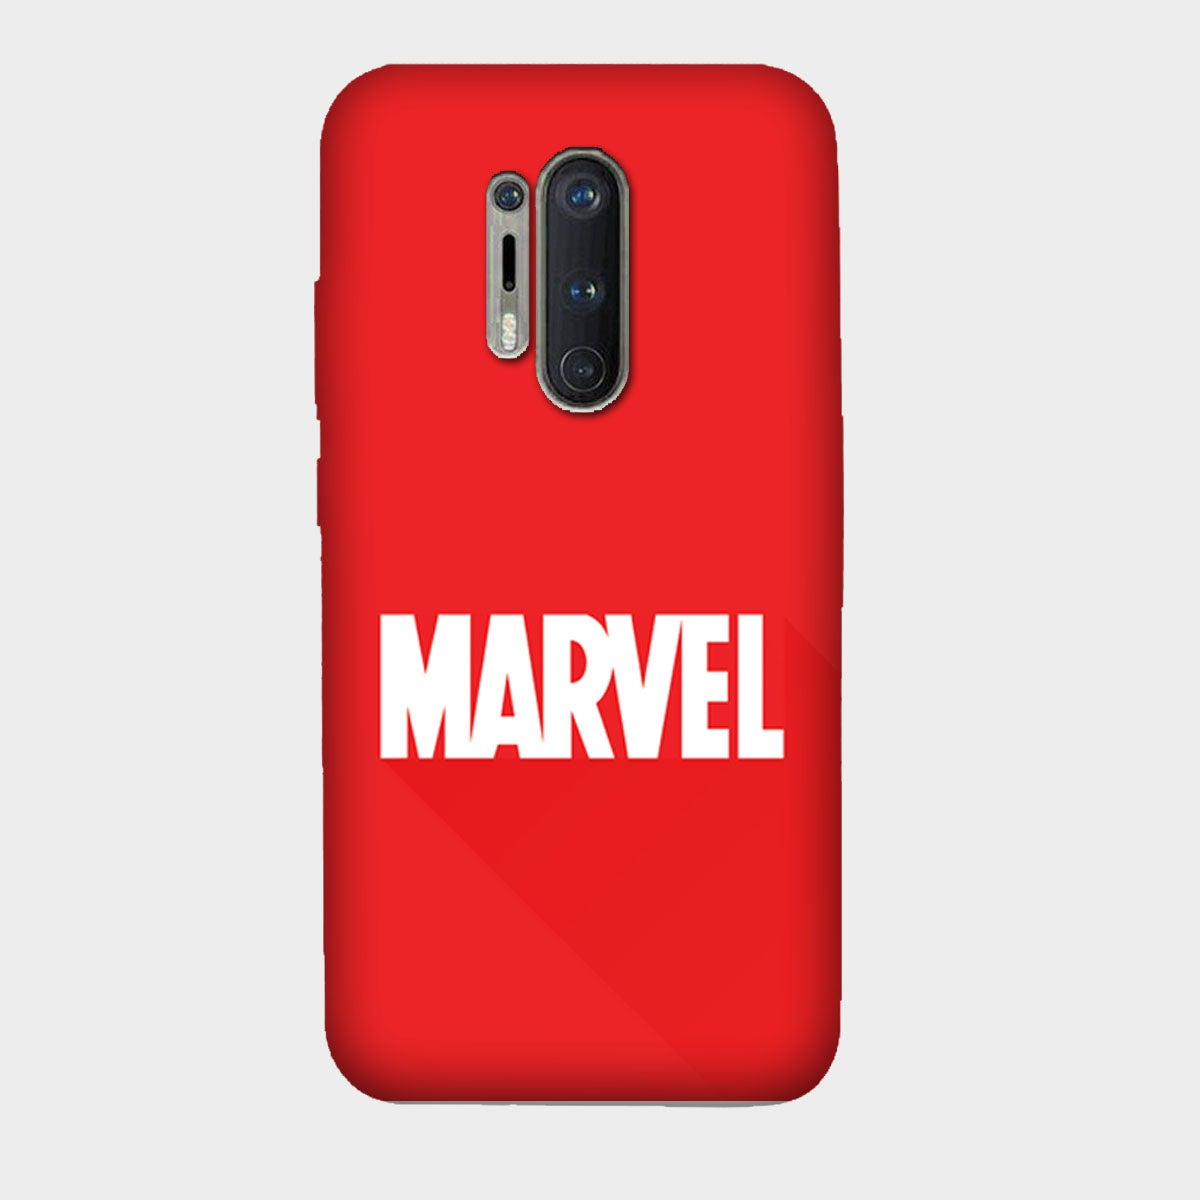 Marvel - Red - Mobile Phone Cover - Hard Case - OnePlus